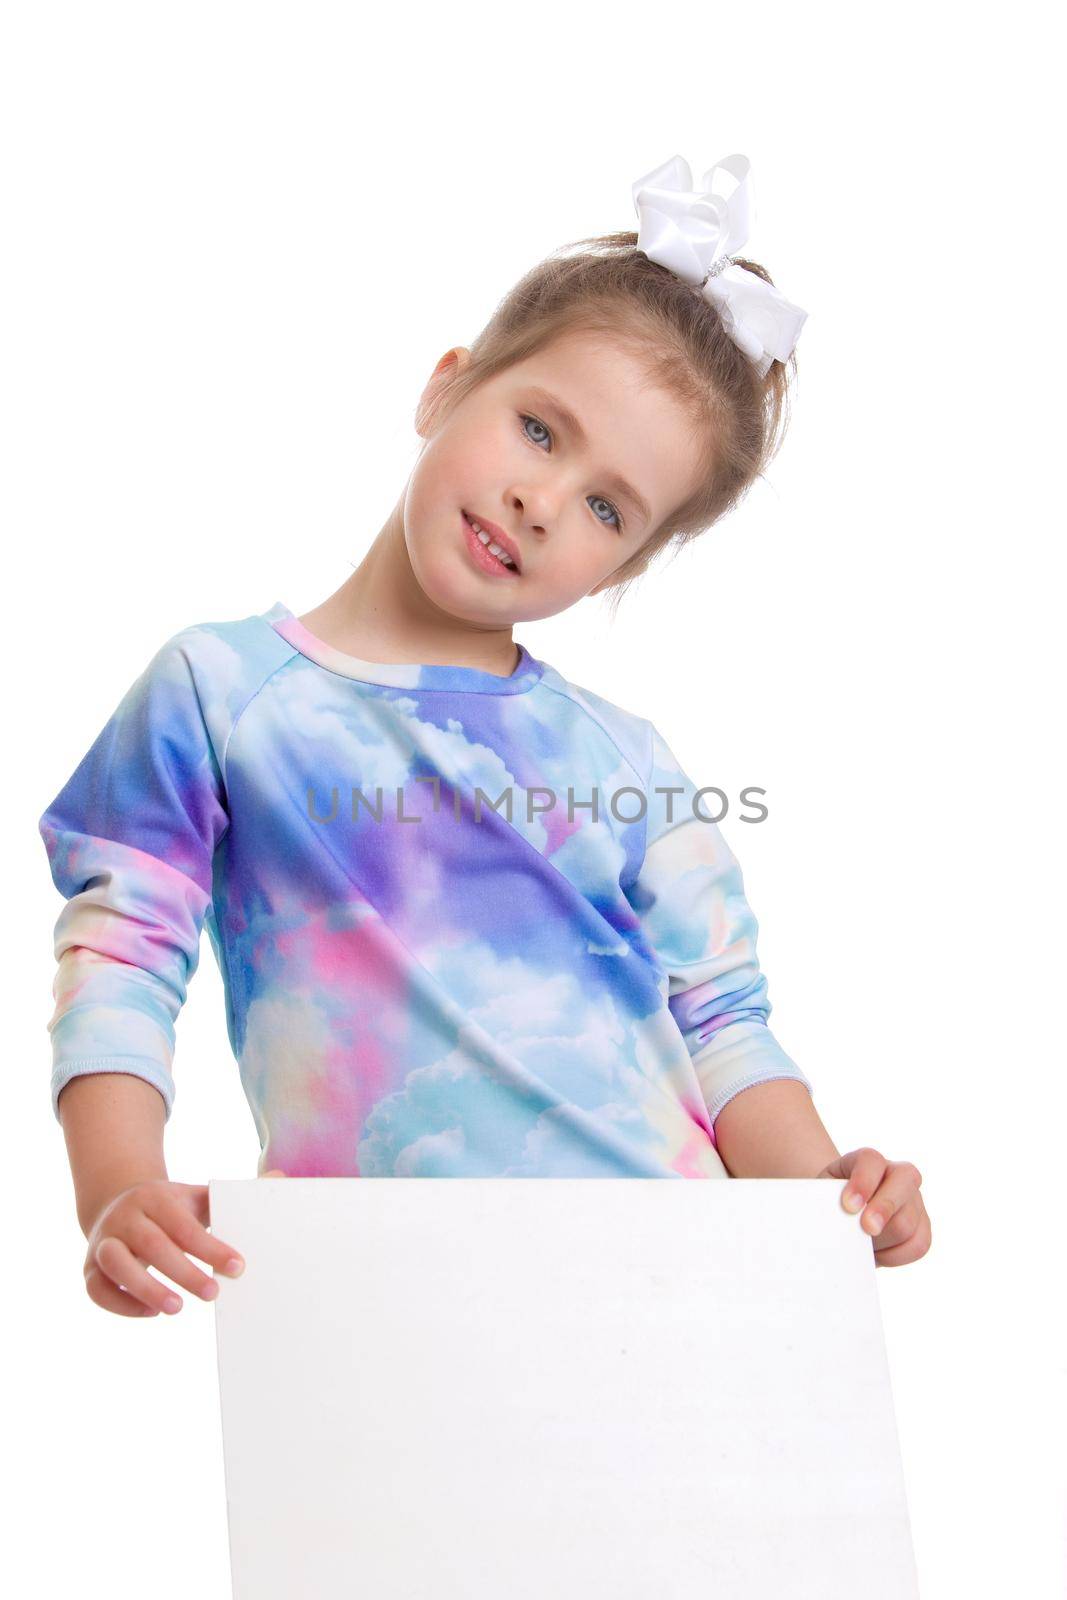 Portrait of beautiful preteen girl. Lovely girl in bright summer dress posing on isolated white background. Close up shot of child looking at camera with serious face expression